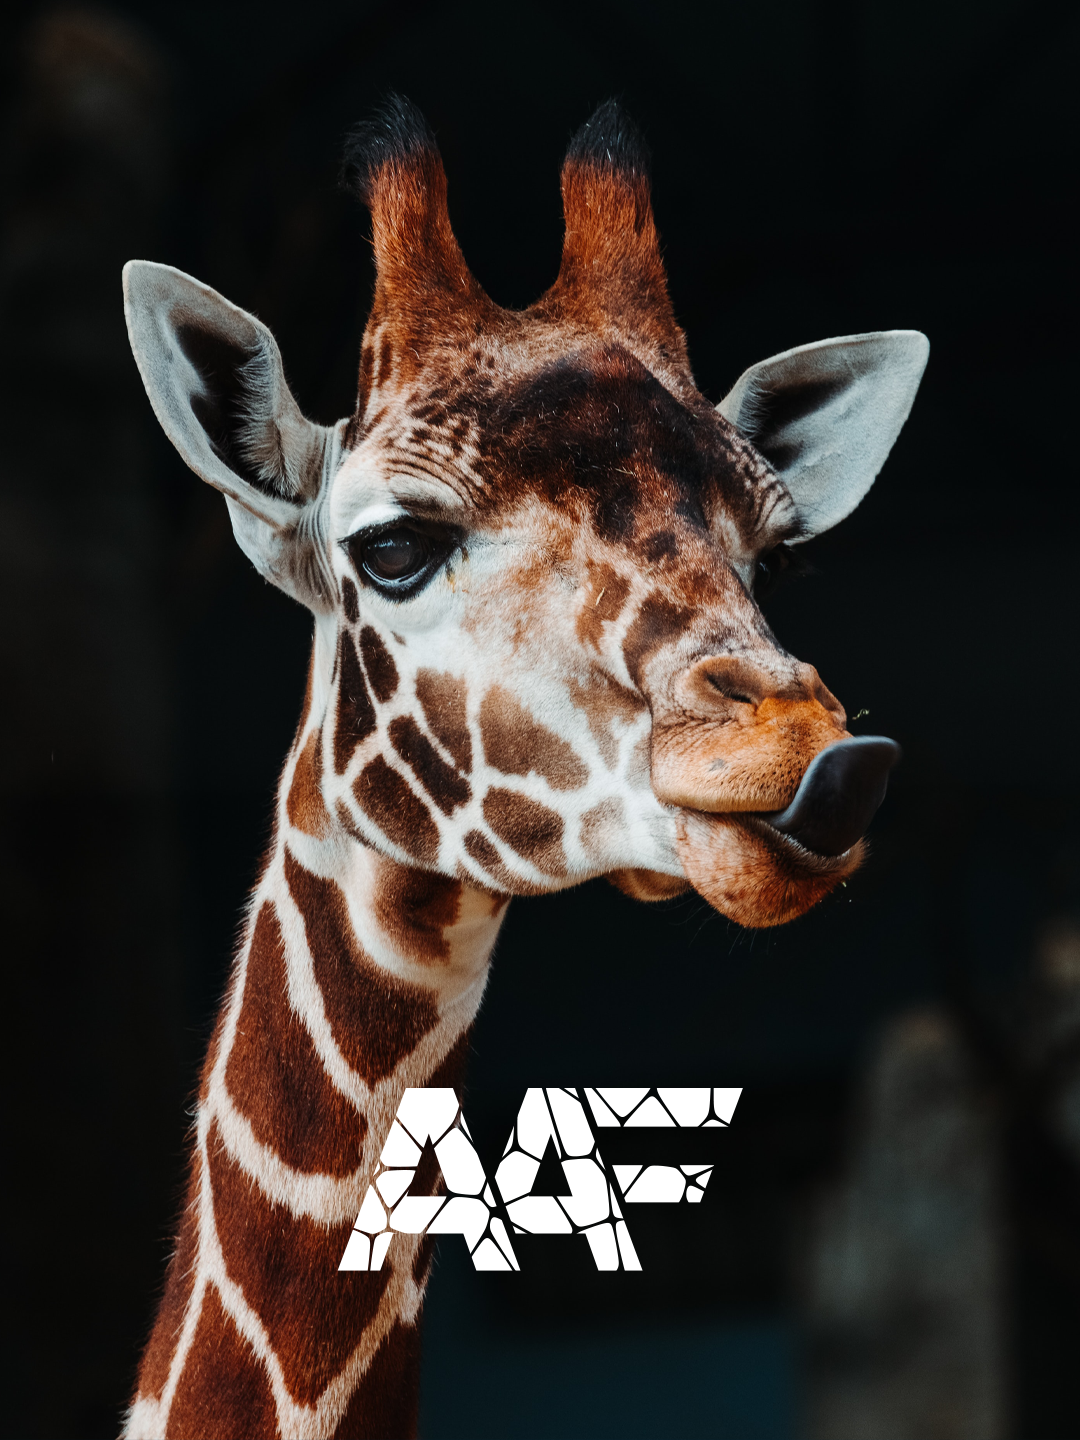 A giraffe poking out its tongue behind the Animal Affinity logo design.